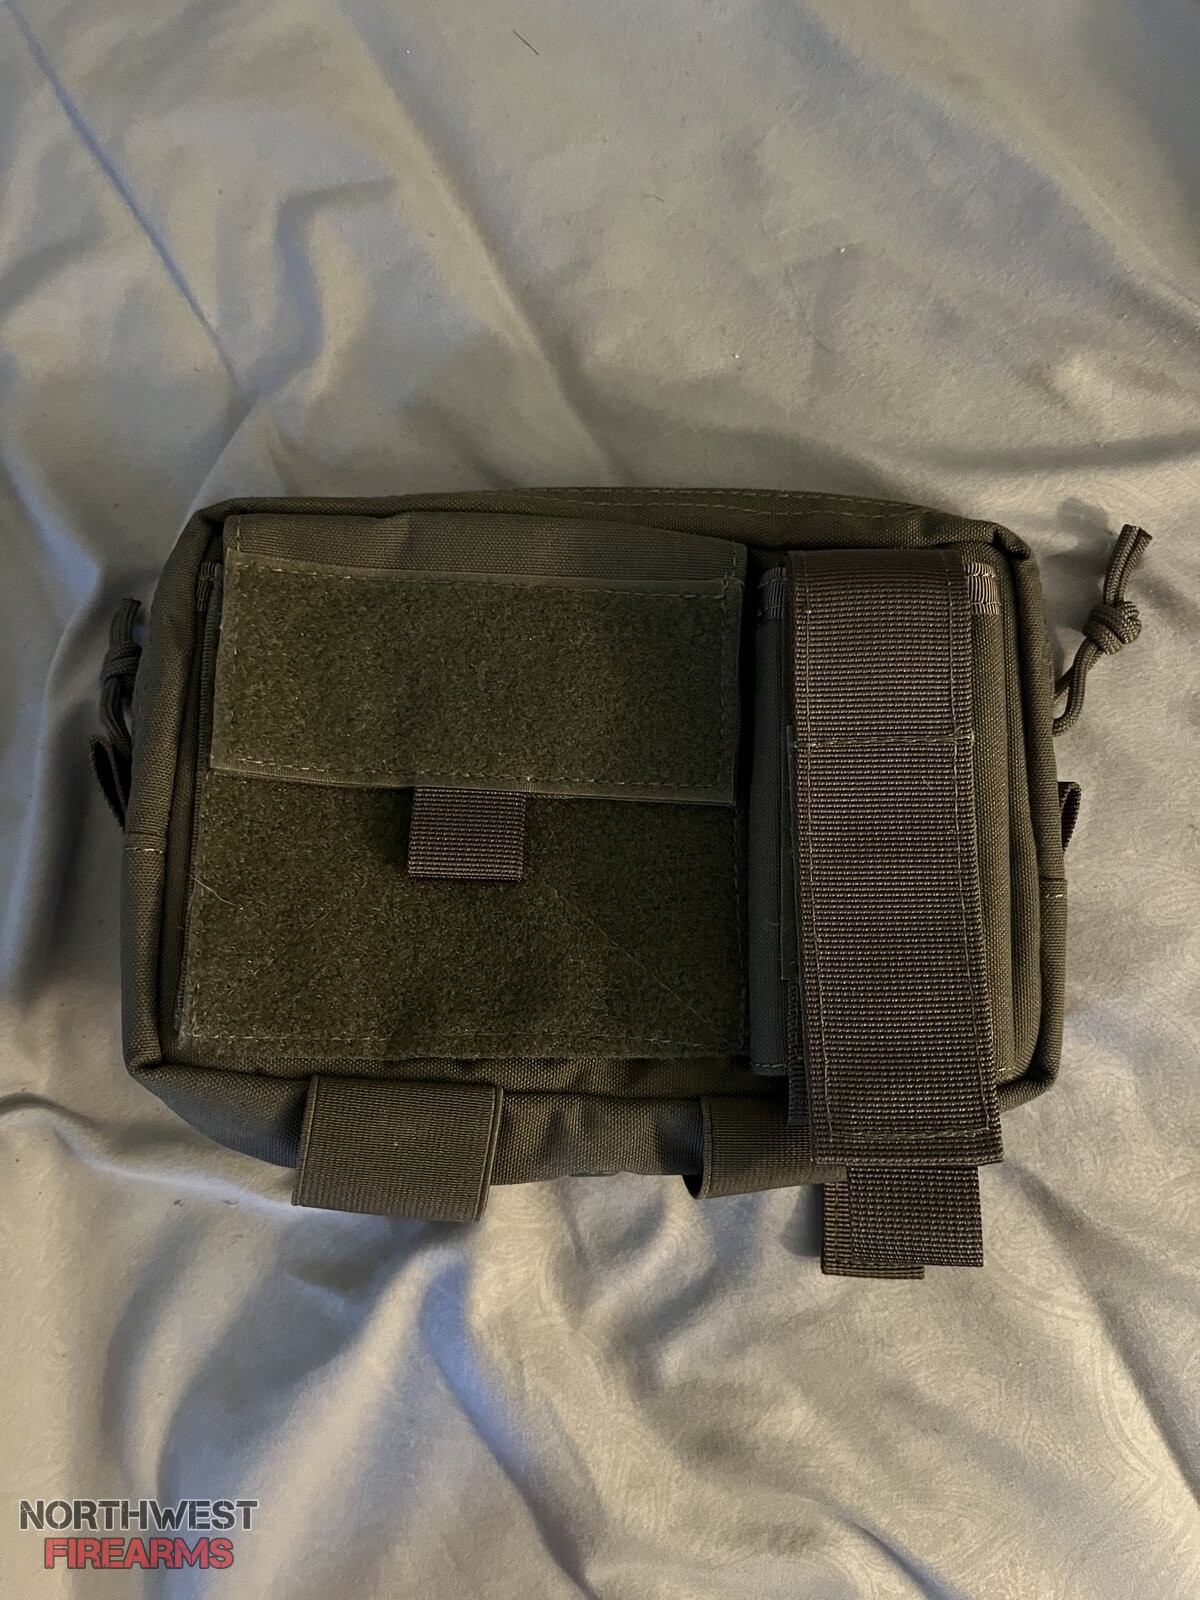 Shellback tactical super admin pouch | Northwest Firearms